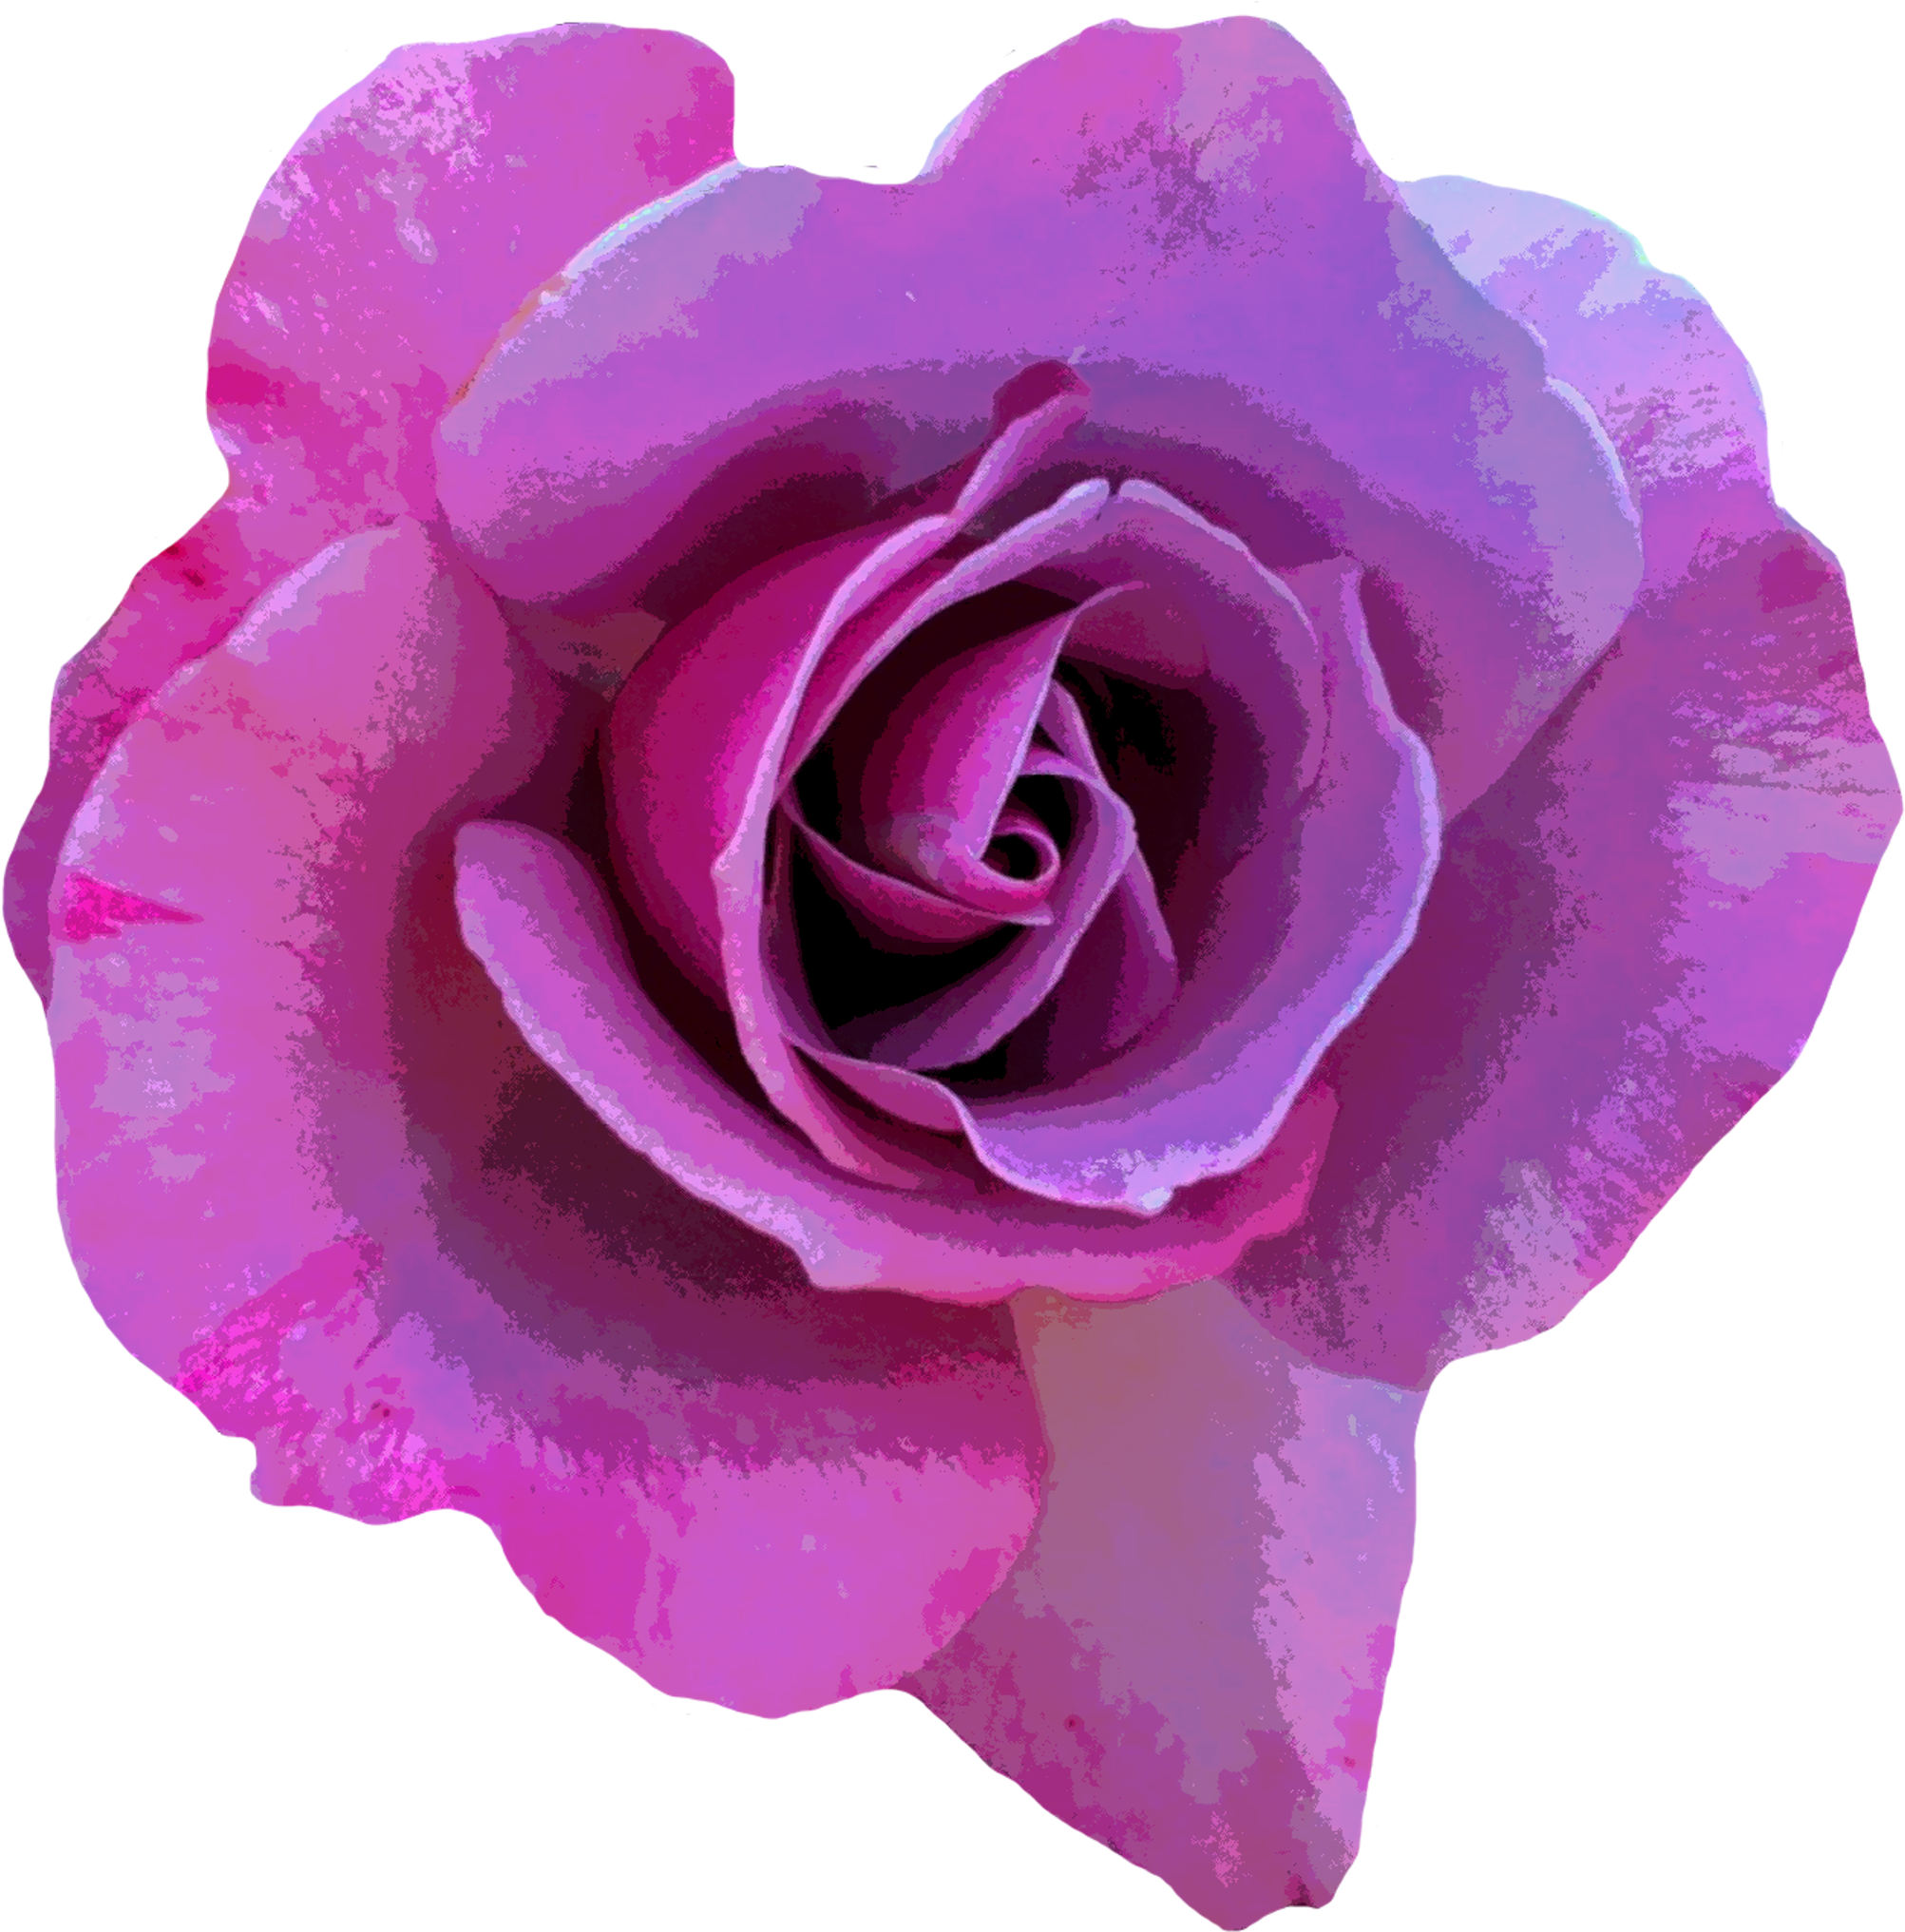 Rose Flower Photography Pink - Animated Hd Love Rose Purple Rose Butterfly (2022x2038)